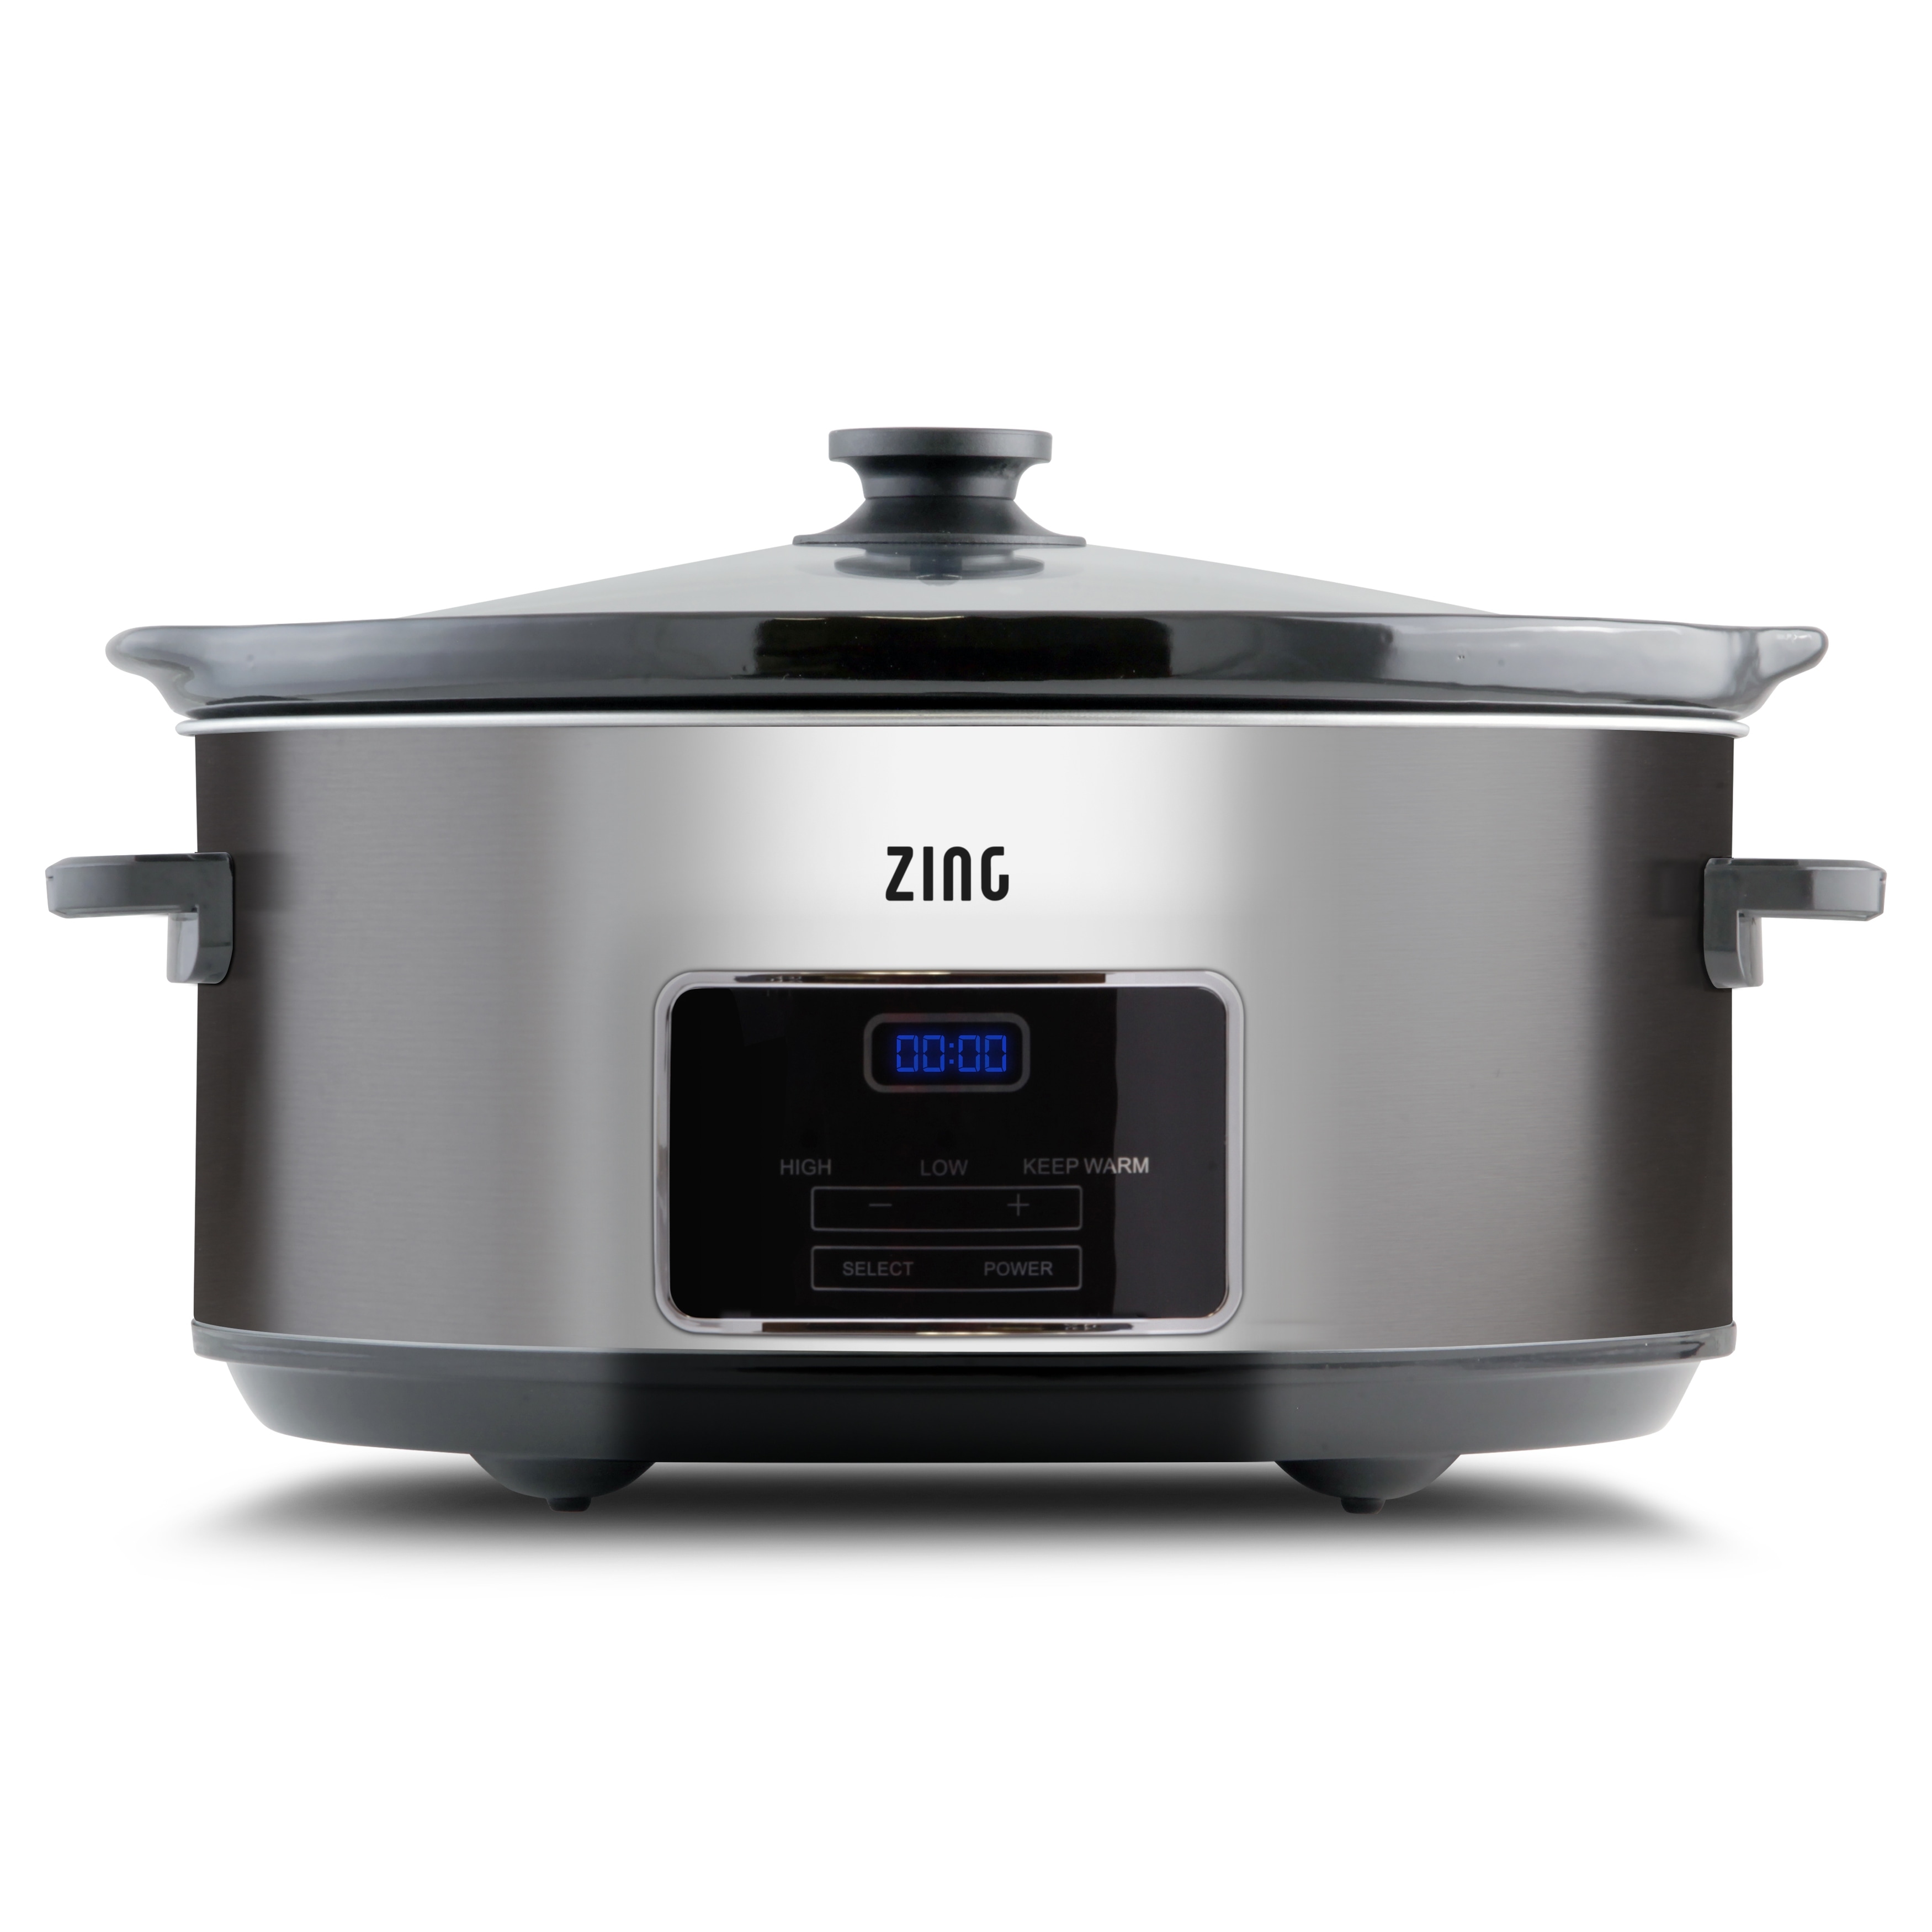 Continental Electric Pro 4-6 Quart Digital Slow Cooker Stainless Steel -  Bed Bath & Beyond - 22544901